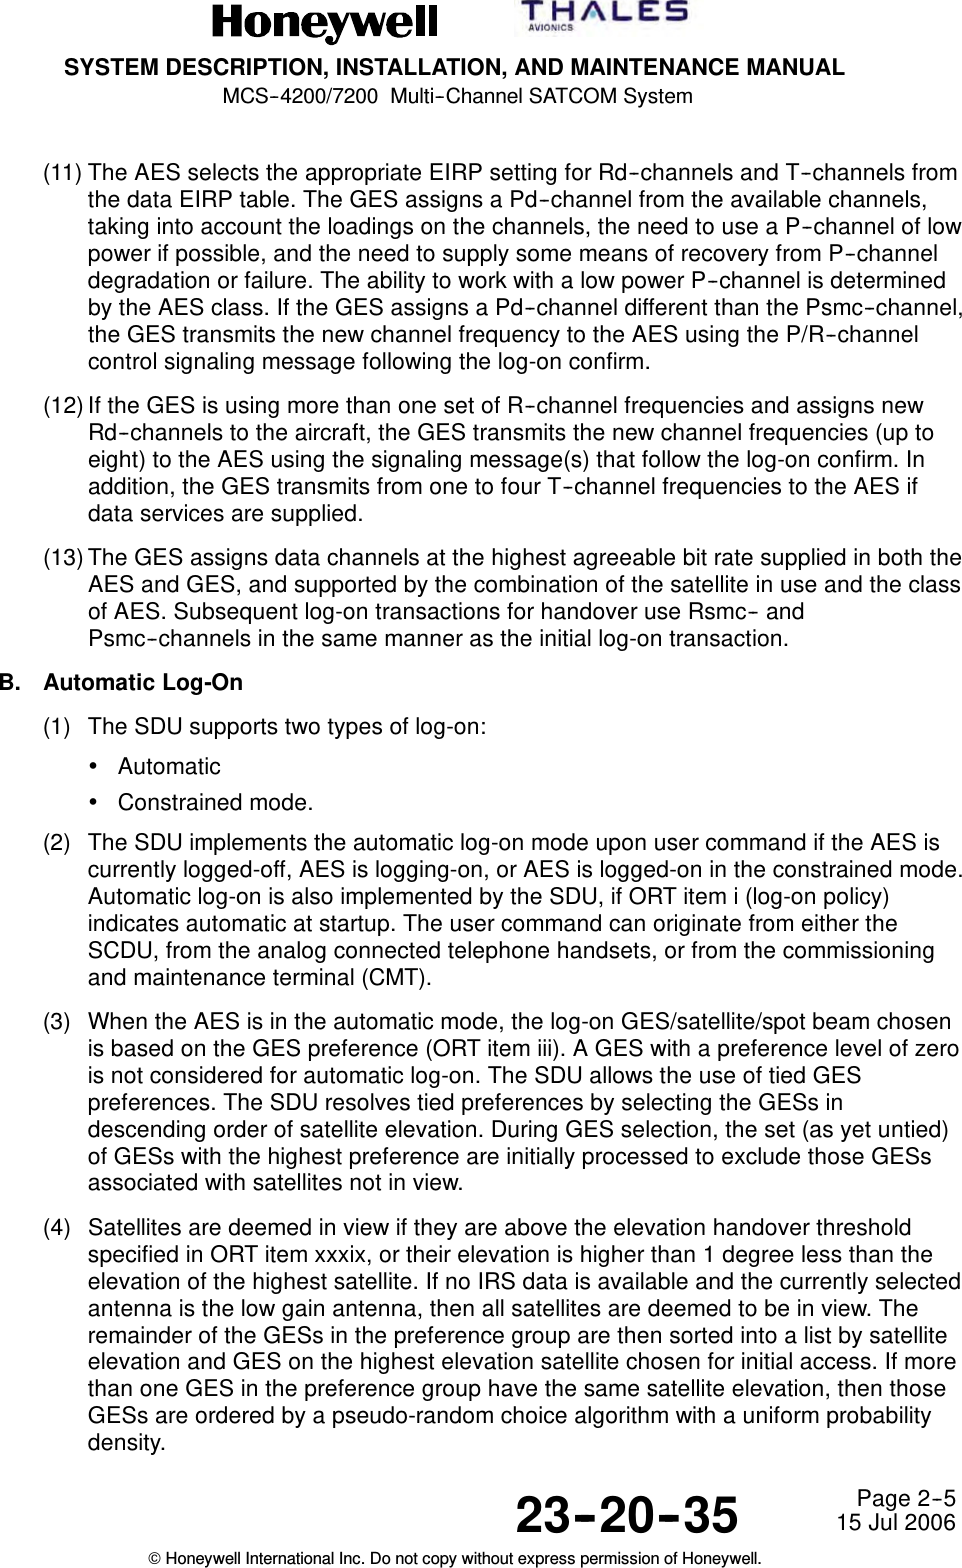 SYSTEM DESCRIPTION, INSTALLATION, AND MAINTENANCE MANUALMCS--4200/7200 Multi--Channel SATCOM System23--20--35 15 Jul 2006Honeywell International Inc. Do not copy without express permission of Honeywell.Page 2--5(11) The AES selects the appropriate EIRP setting for Rd--channels and T--channels fromthe data EIRP table. The GES assigns a Pd--channel from the available channels,taking into account the loadings on the channels, the need to use a P--channel of lowpower if possible, and the need to supply some means of recovery from P--channeldegradation or failure. The ability to work with a low power P--channel is determinedby the AES class. If the GES assigns a Pd--channel different than the Psmc--channel,the GES transmits the new channel frequency to the AES using the P/R--channelcontrol signaling message following the log-on confirm.(12) If the GES is using more than one set of R--channel frequencies and assigns newRd--channels to the aircraft, the GES transmits the new channel frequencies (up toeight) to the AES using the signaling message(s) that follow the log-on confirm. Inaddition, the GES transmits from one to four T--channel frequencies to the AES ifdata services are supplied.(13) The GES assigns data channels at the highest agreeable bit rate supplied in both theAES and GES, and supported by the combination of the satellite in use and the classof AES. Subsequent log-on transactions for handover use Rsmc-- andPsmc--channels in the same manner as the initial log-on transaction.B. Automatic Log-On(1) The SDU supports two types of log-on:•Automatic•Constrained mode.(2) The SDU implements the automatic log-on mode upon user command if the AES iscurrently logged-off, AES is logging-on, or AES is logged-on in the constrained mode.Automatic log-on is also implemented by the SDU, if ORT item i (log-on policy)indicates automatic at startup. The user command can originate from either theSCDU, from the analog connected telephone handsets, or from the commissioningand maintenance terminal (CMT).(3) When the AES is in the automatic mode, the log-on GES/satellite/spot beam chosenis based on the GES preference (ORT item iii). A GES with a preference level of zerois not considered for automatic log-on. The SDU allows the use of tied GESpreferences. The SDU resolves tied preferences by selecting the GESs indescending order of satellite elevation. During GES selection, the set (as yet untied)of GESs with the highest preference are initially processed to exclude those GESsassociated with satellites not in view.(4) Satellites are deemed in view if they are above the elevation handover thresholdspecified in ORT item xxxix, or their elevation is higher than 1 degree less than theelevation of the highest satellite. If no IRS data is available and the currently selectedantenna is the low gain antenna, then all satellites are deemed to be in view. Theremainder of the GESs in the preference group are then sorted into a list by satelliteelevation and GES on the highest elevation satellite chosen for initial access. If morethan one GES in the preference group have the same satellite elevation, then thoseGESs are ordered by a pseudo-random choice algorithm with a uniform probabilitydensity.